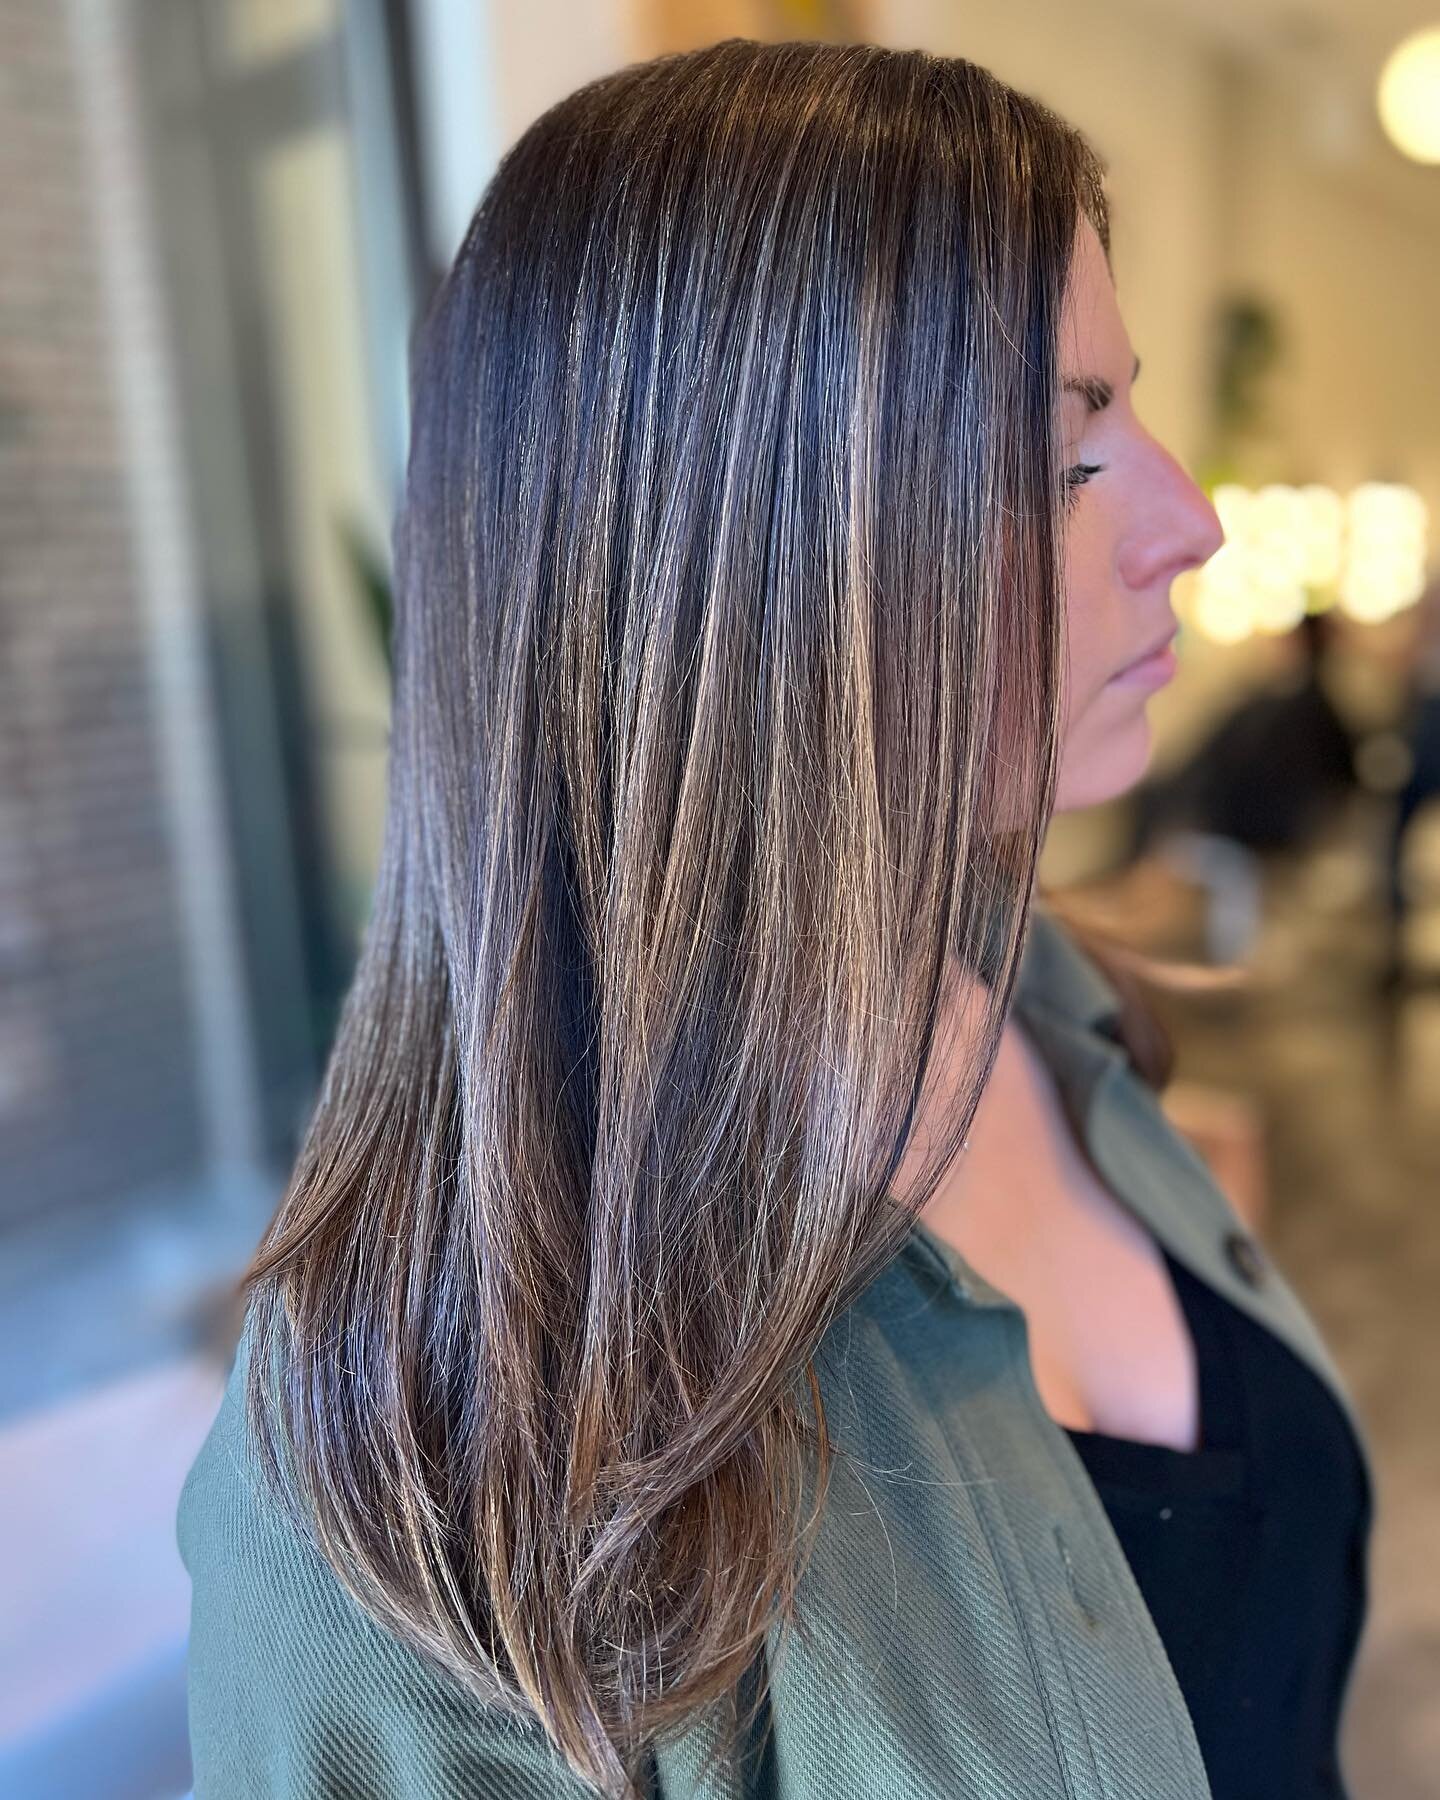 I feel like there has been a lot of very blonde on here so we gotta break up the feed with a softer bronde situation 💗 

Full head balayage with some teasey lights mixed in. Root melted and glossed for the ultimate blend into her natural root color.